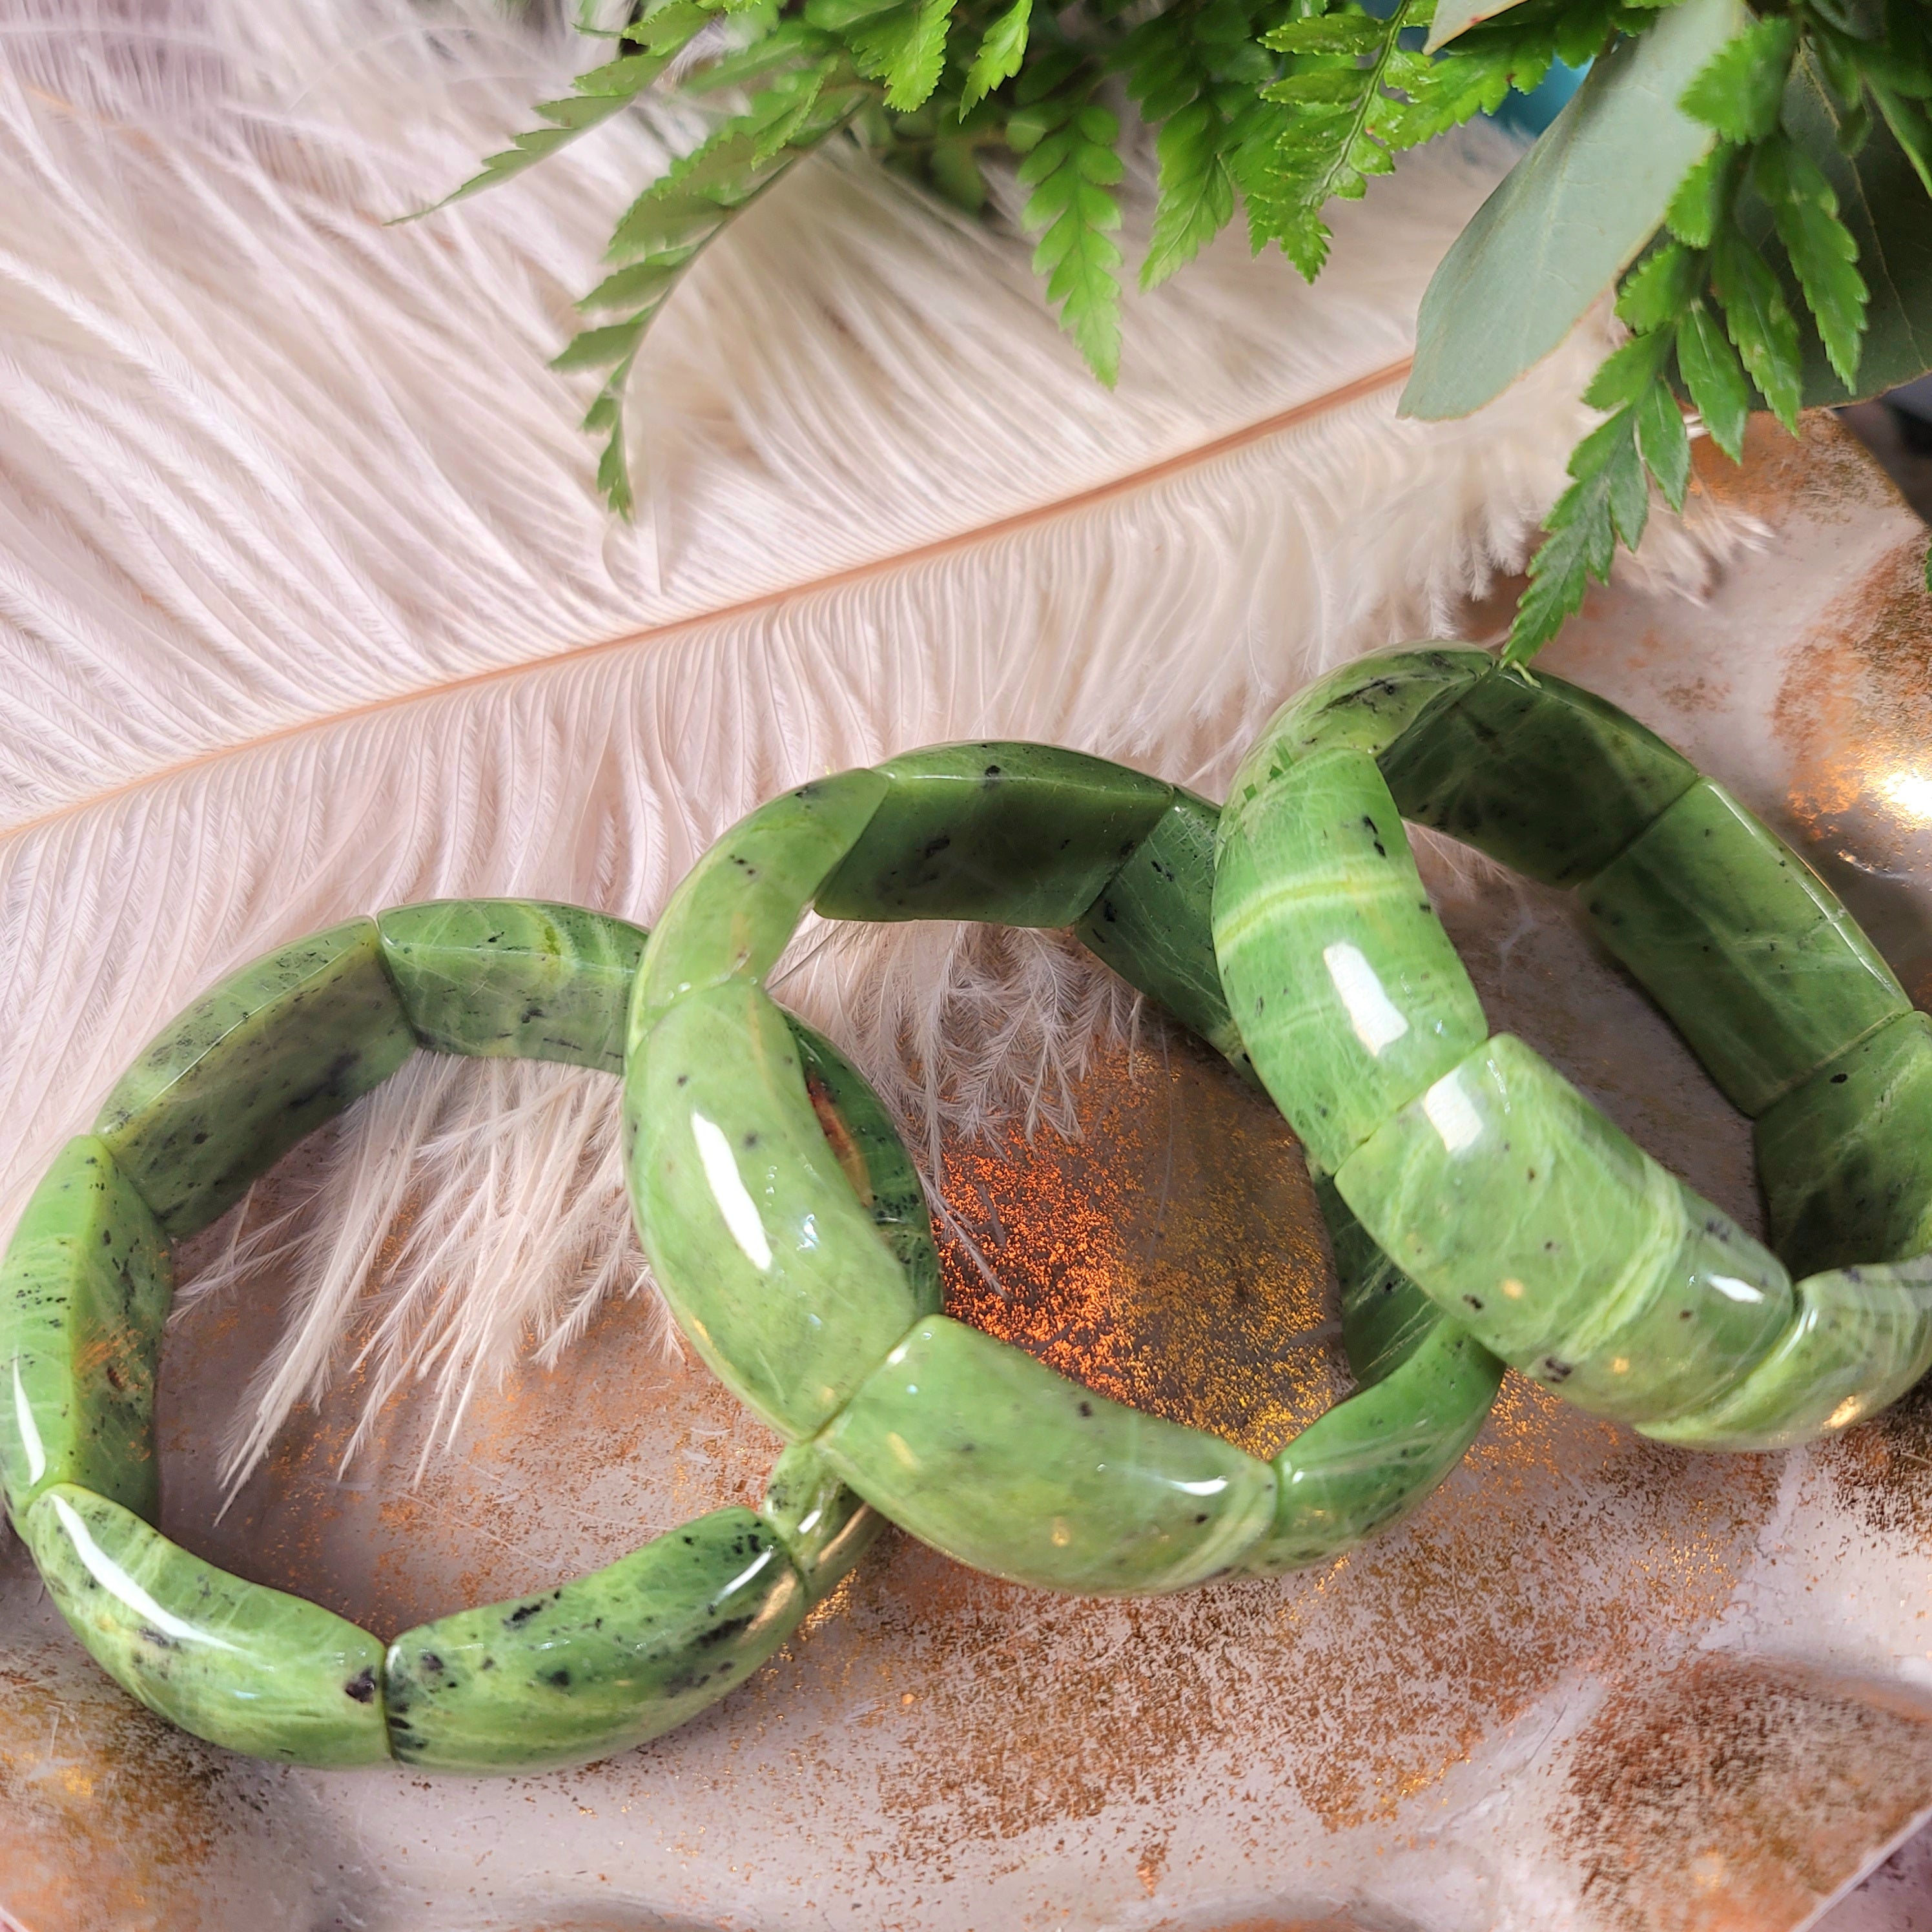 Jade Stretchy Bangle Bracelet for Acceptance and Peace and Serenity